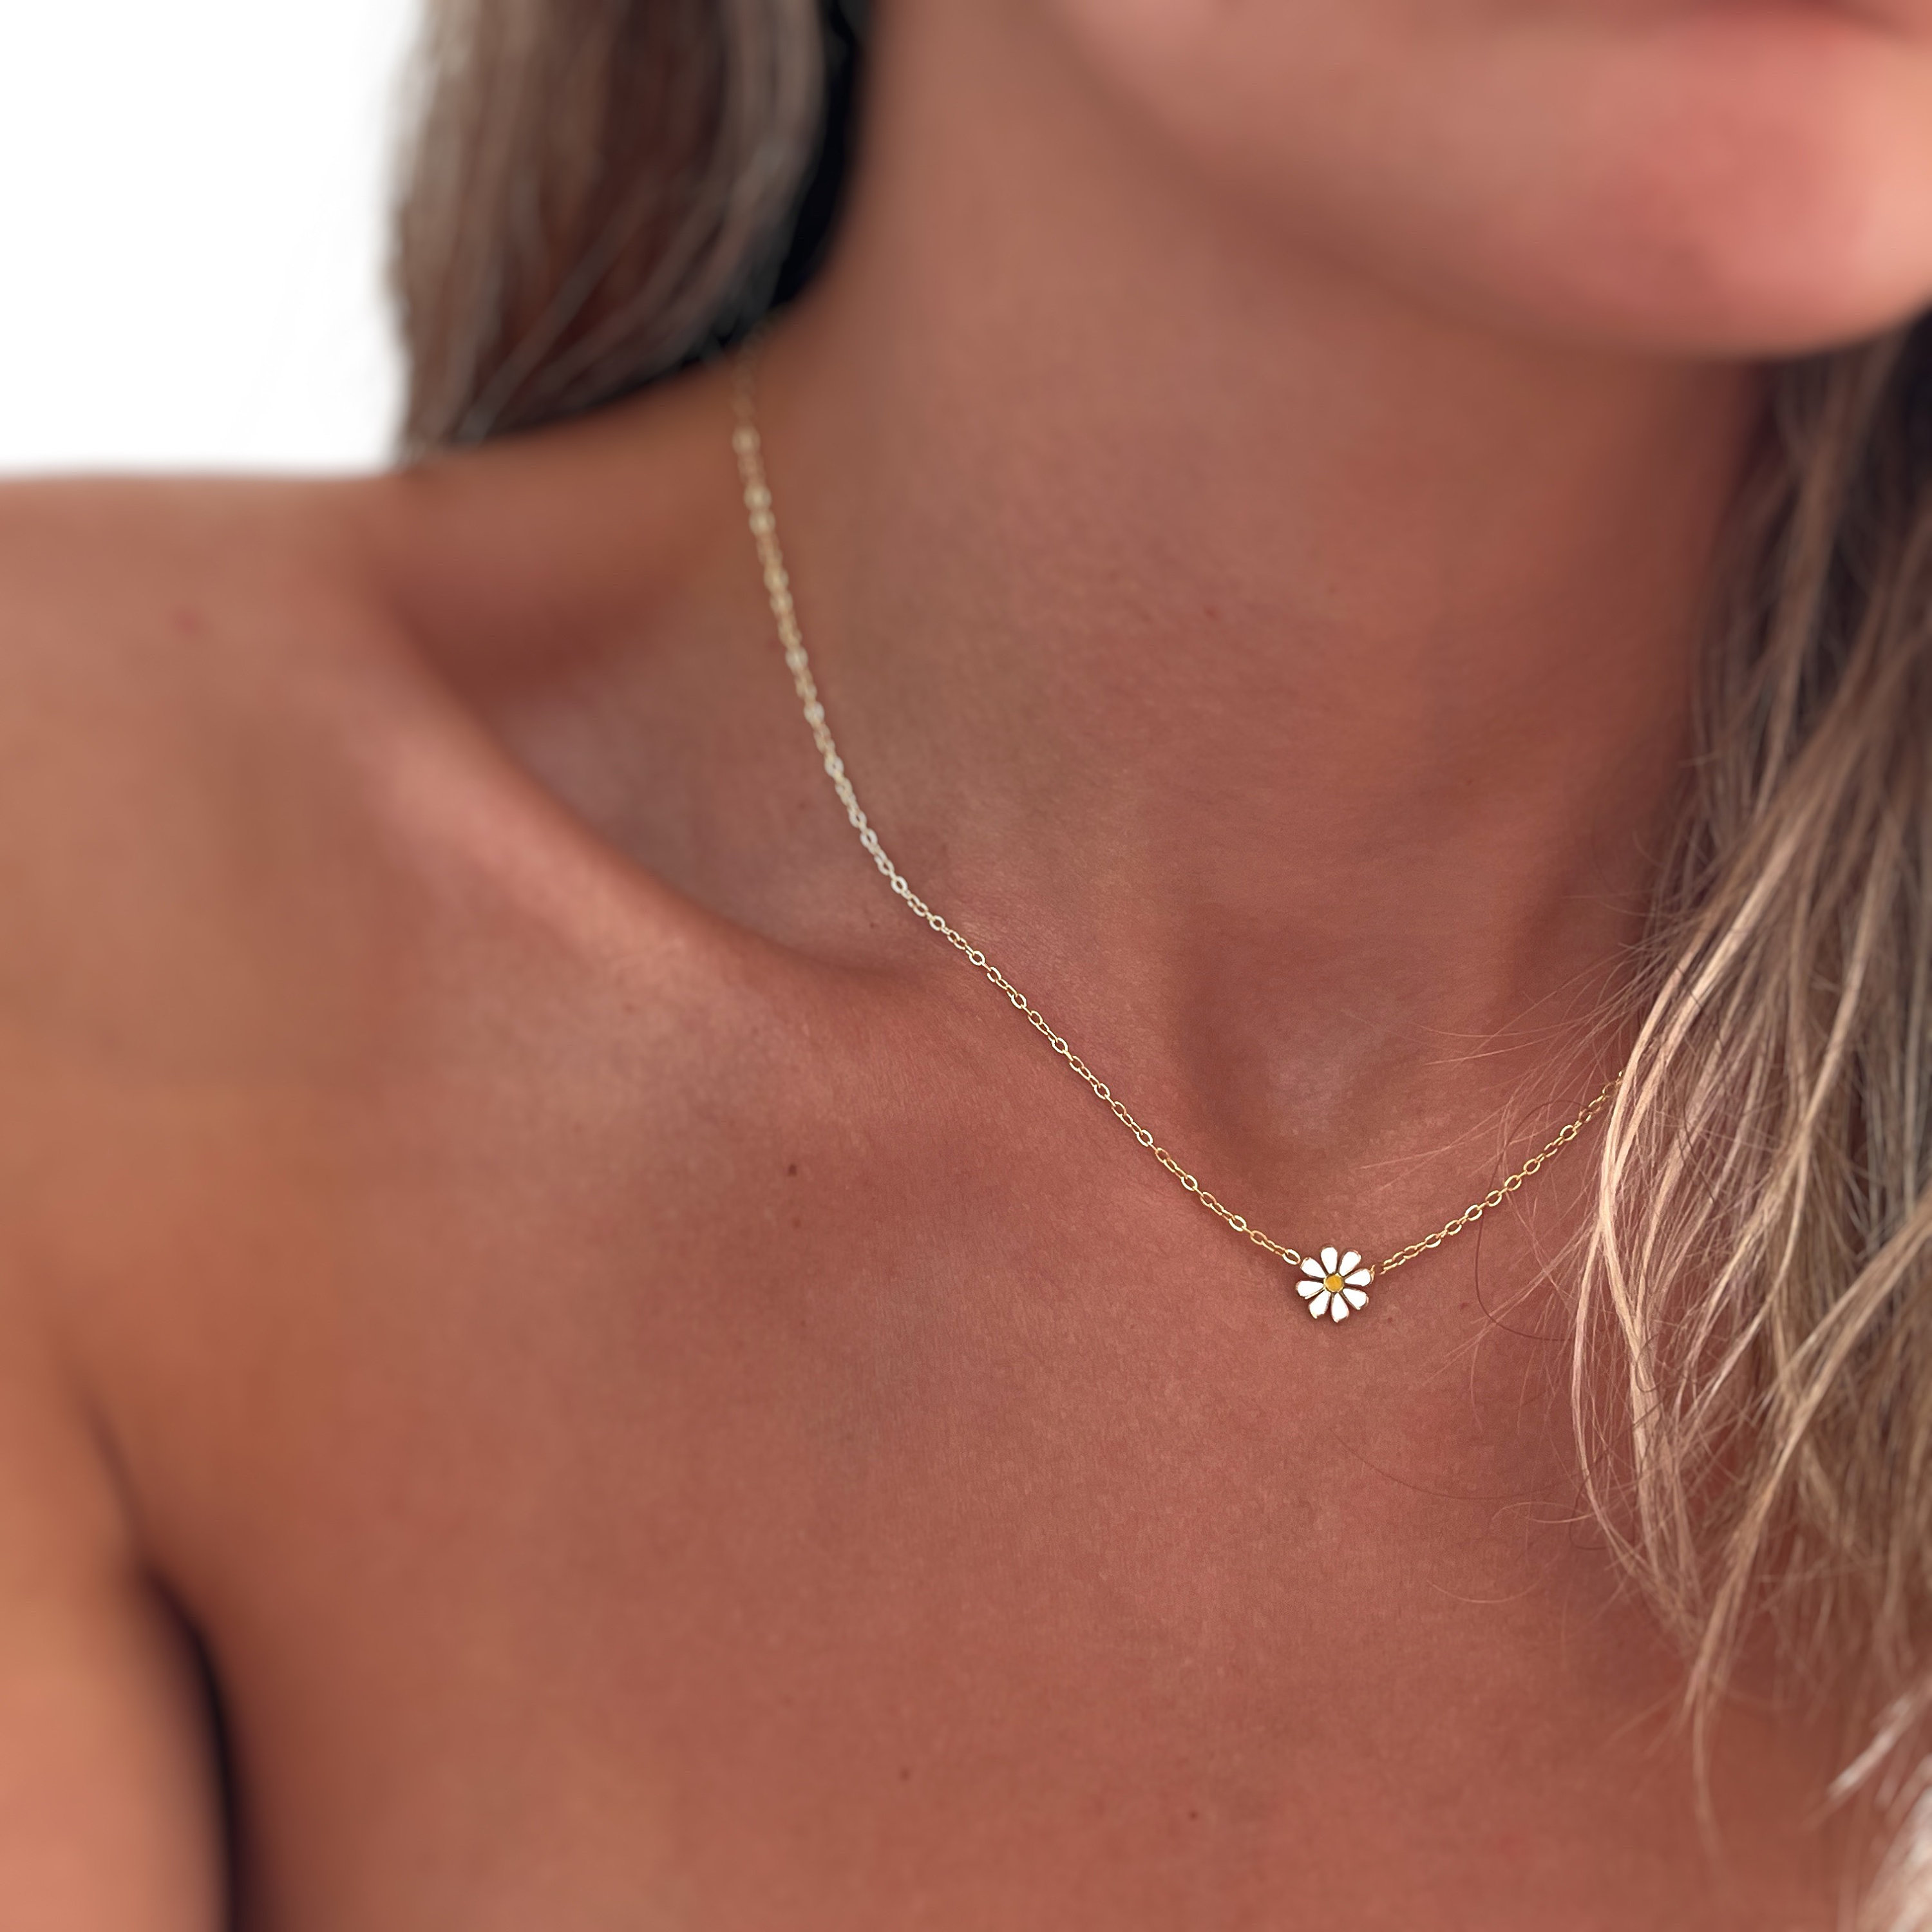 Gifts for her - Tiny Flower Necklace